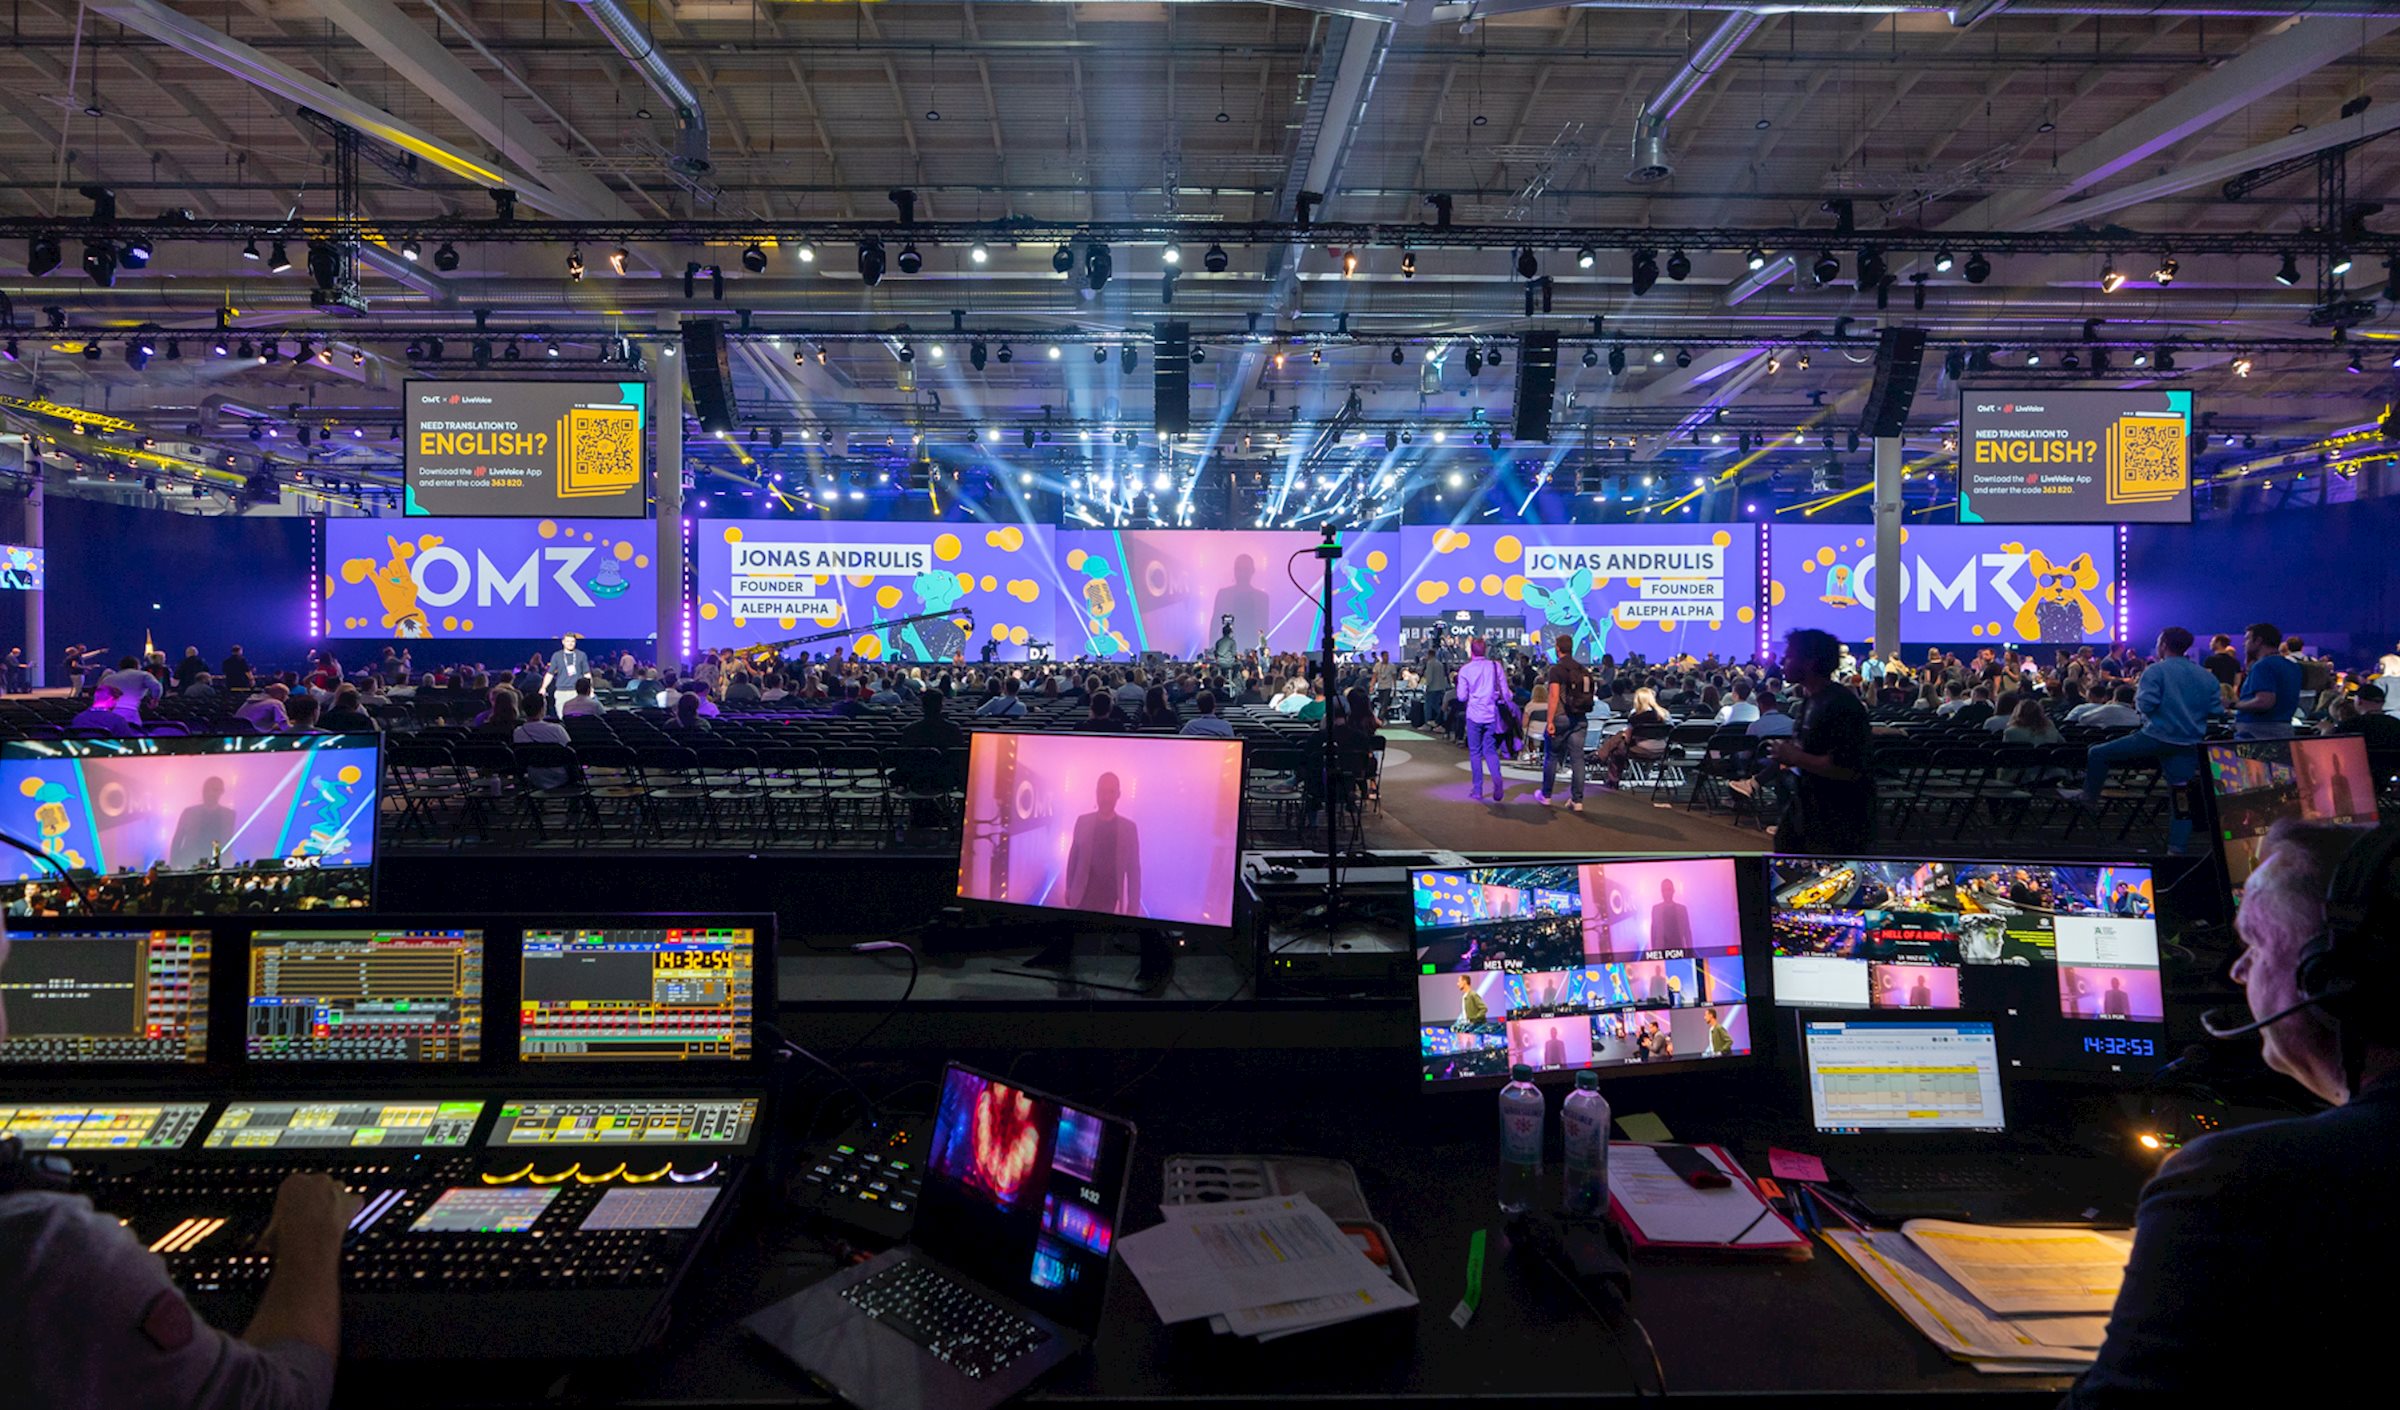 With video, lighting, rigging and audio technology as well as stage and decor construction, PRG created the perfect atmosphere for the OMR Festival 2023 in Hamburg